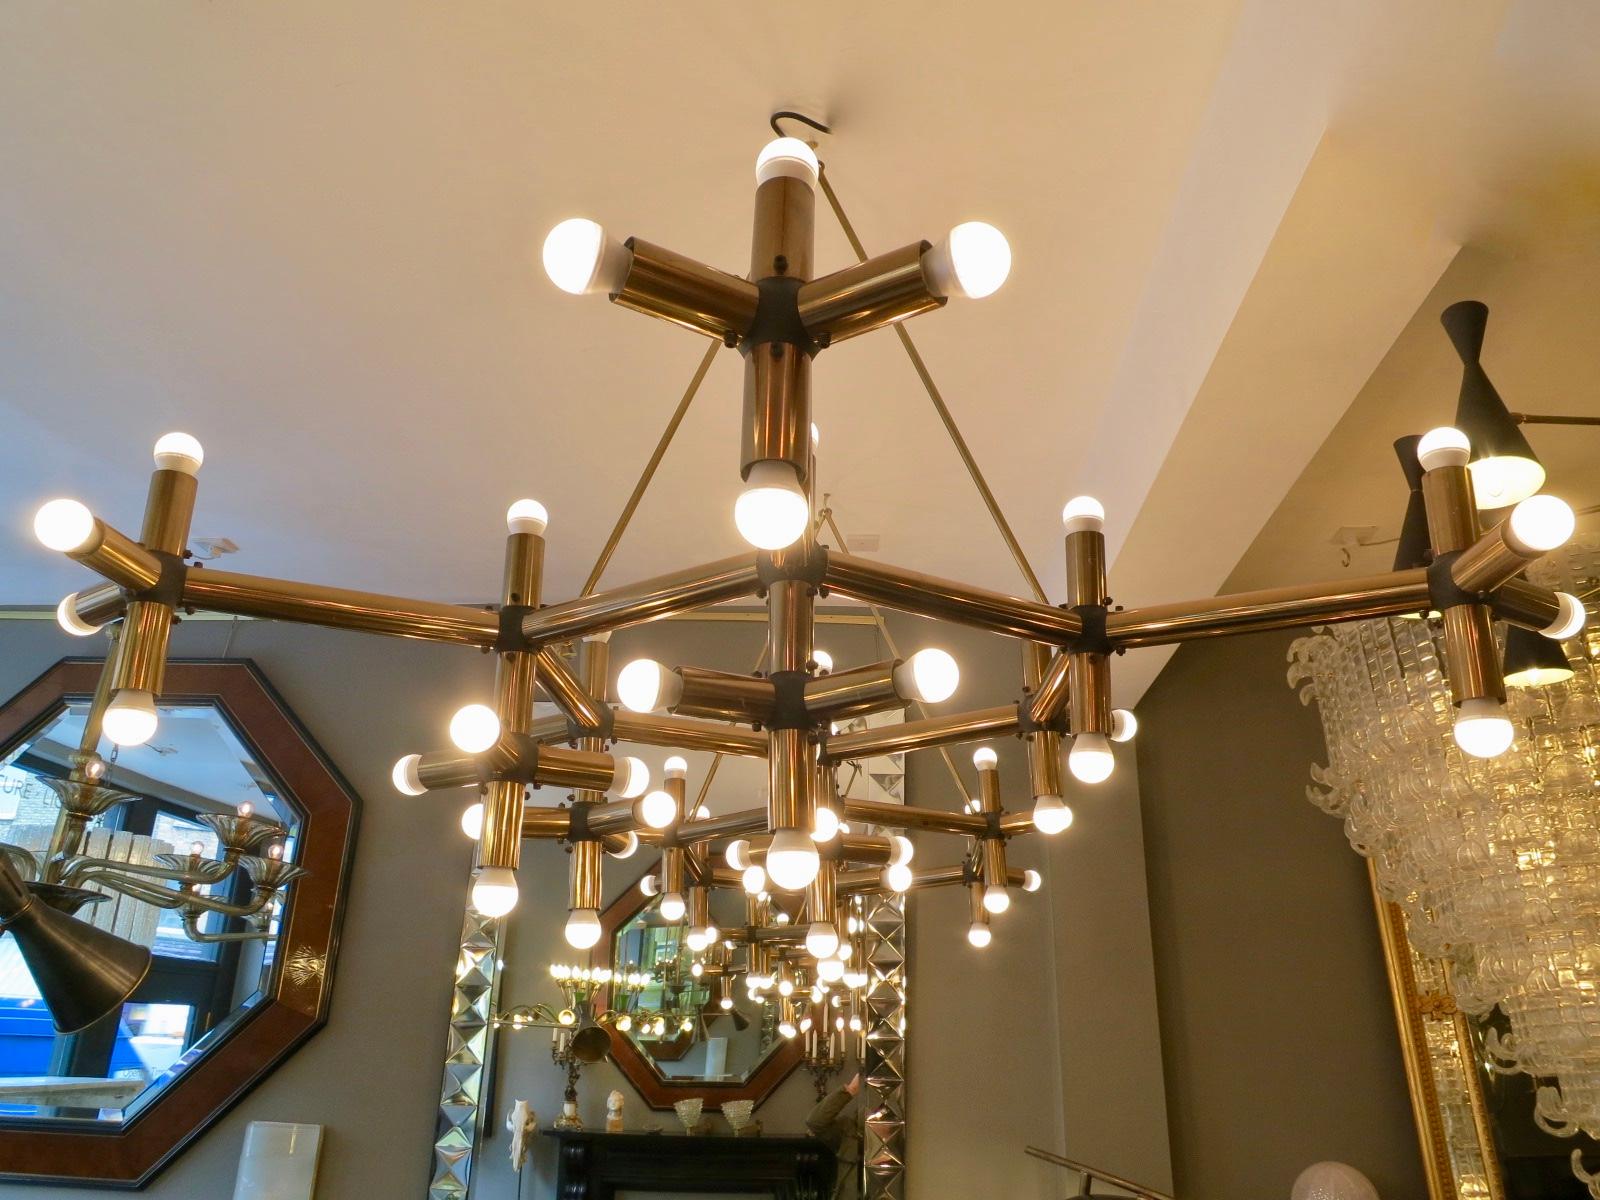 An unusual and very large tubular geometrical “ lichtstruktur “ chandelier in brass by Robert Haussmann. Having 54-light fittings. Hung from the ceiling with brass matching hooked rods. Imported from Paris and installed in Mayfair London. Then